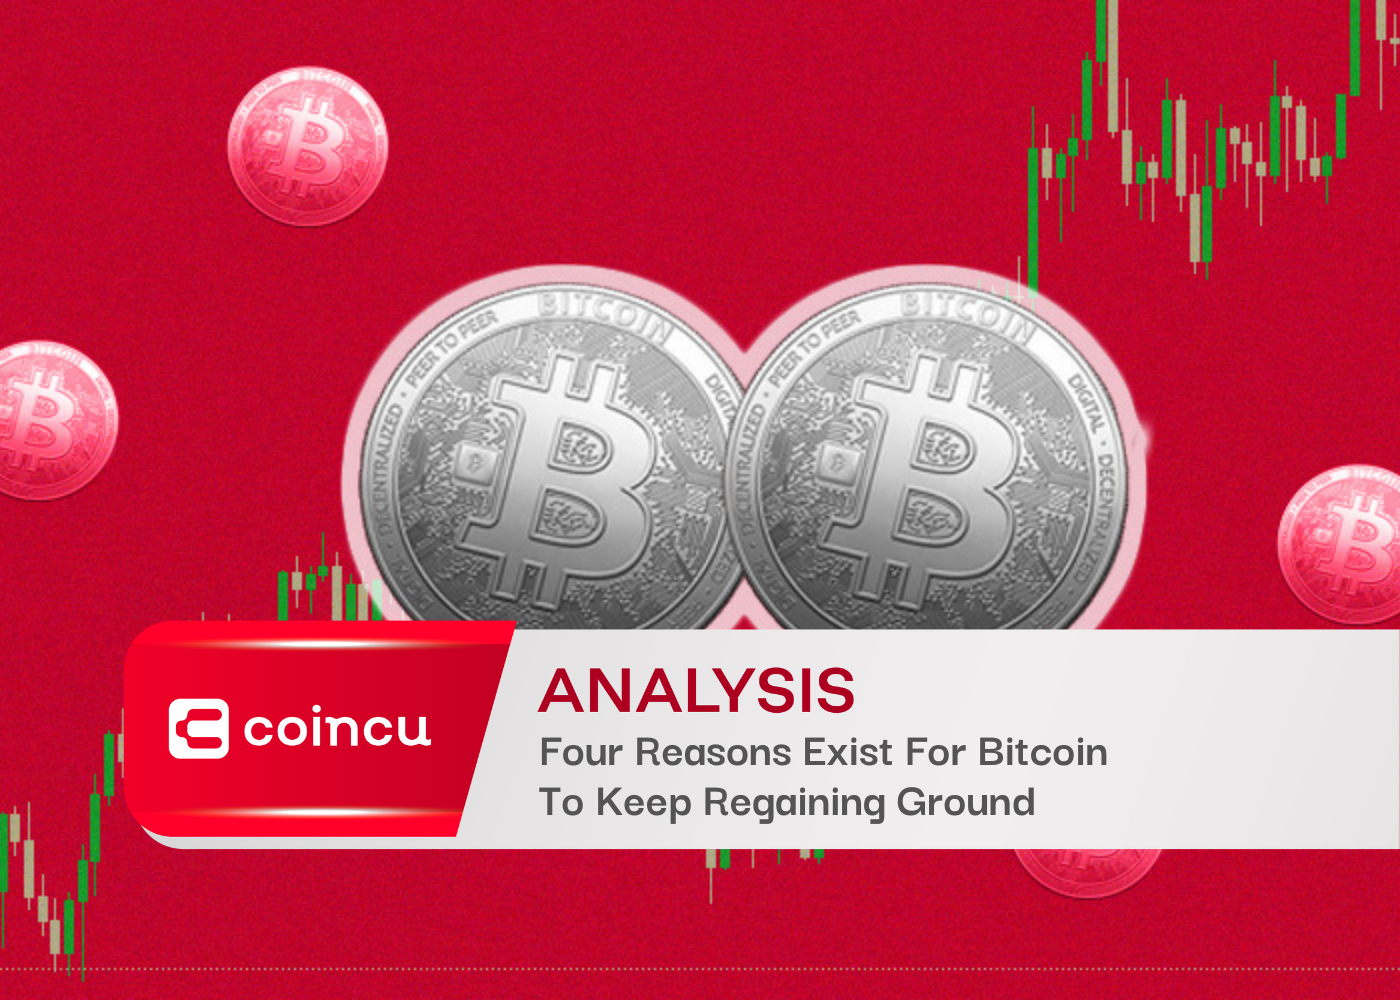 Four Reasons Exist For Bitcoin